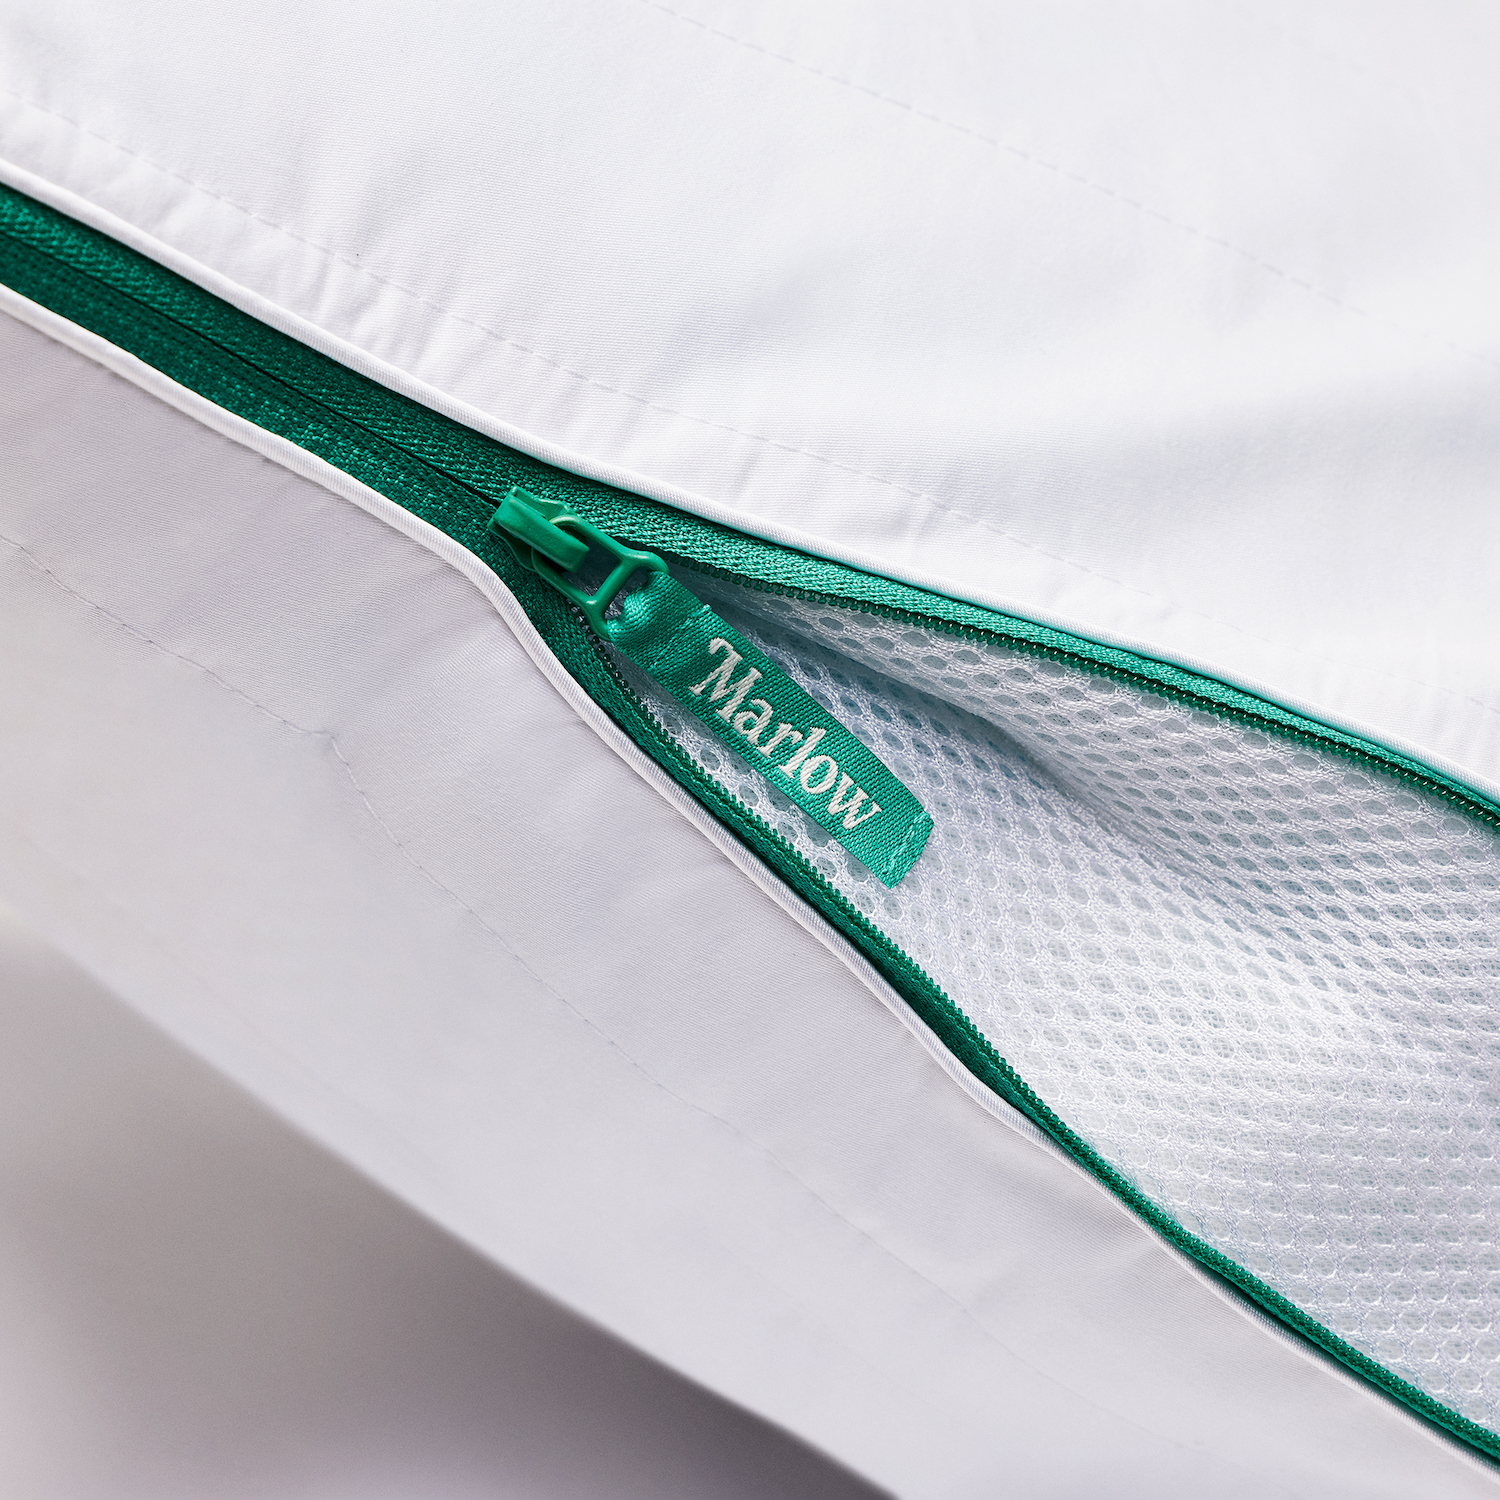 A Marlow pillow from Brooklinen's new sub-brand showing a close-up of the green zipper on the side that adjusts the pillow's firmness